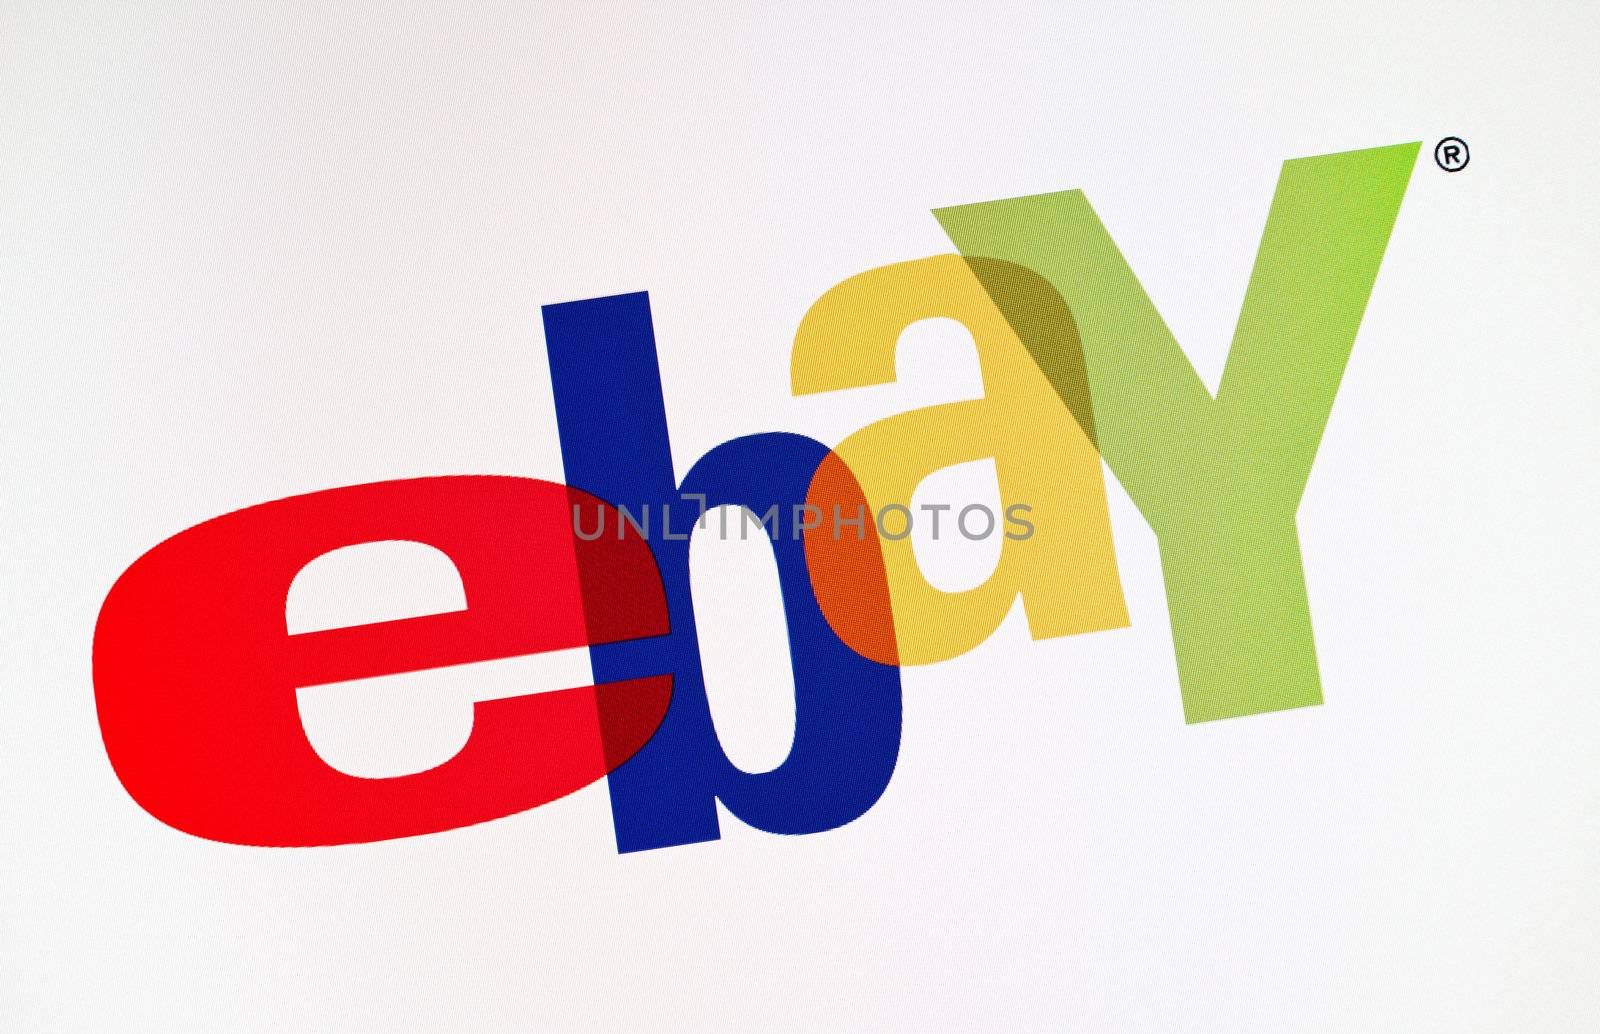 Kiev, Ukraine - December 15, 2011 - Close-up view of eBay logotype on a monitor screen. eBay Inc. is an american online auction and a shopping web site service worldwide. Founded in September 3, 1995 by Pierre Omidyar.